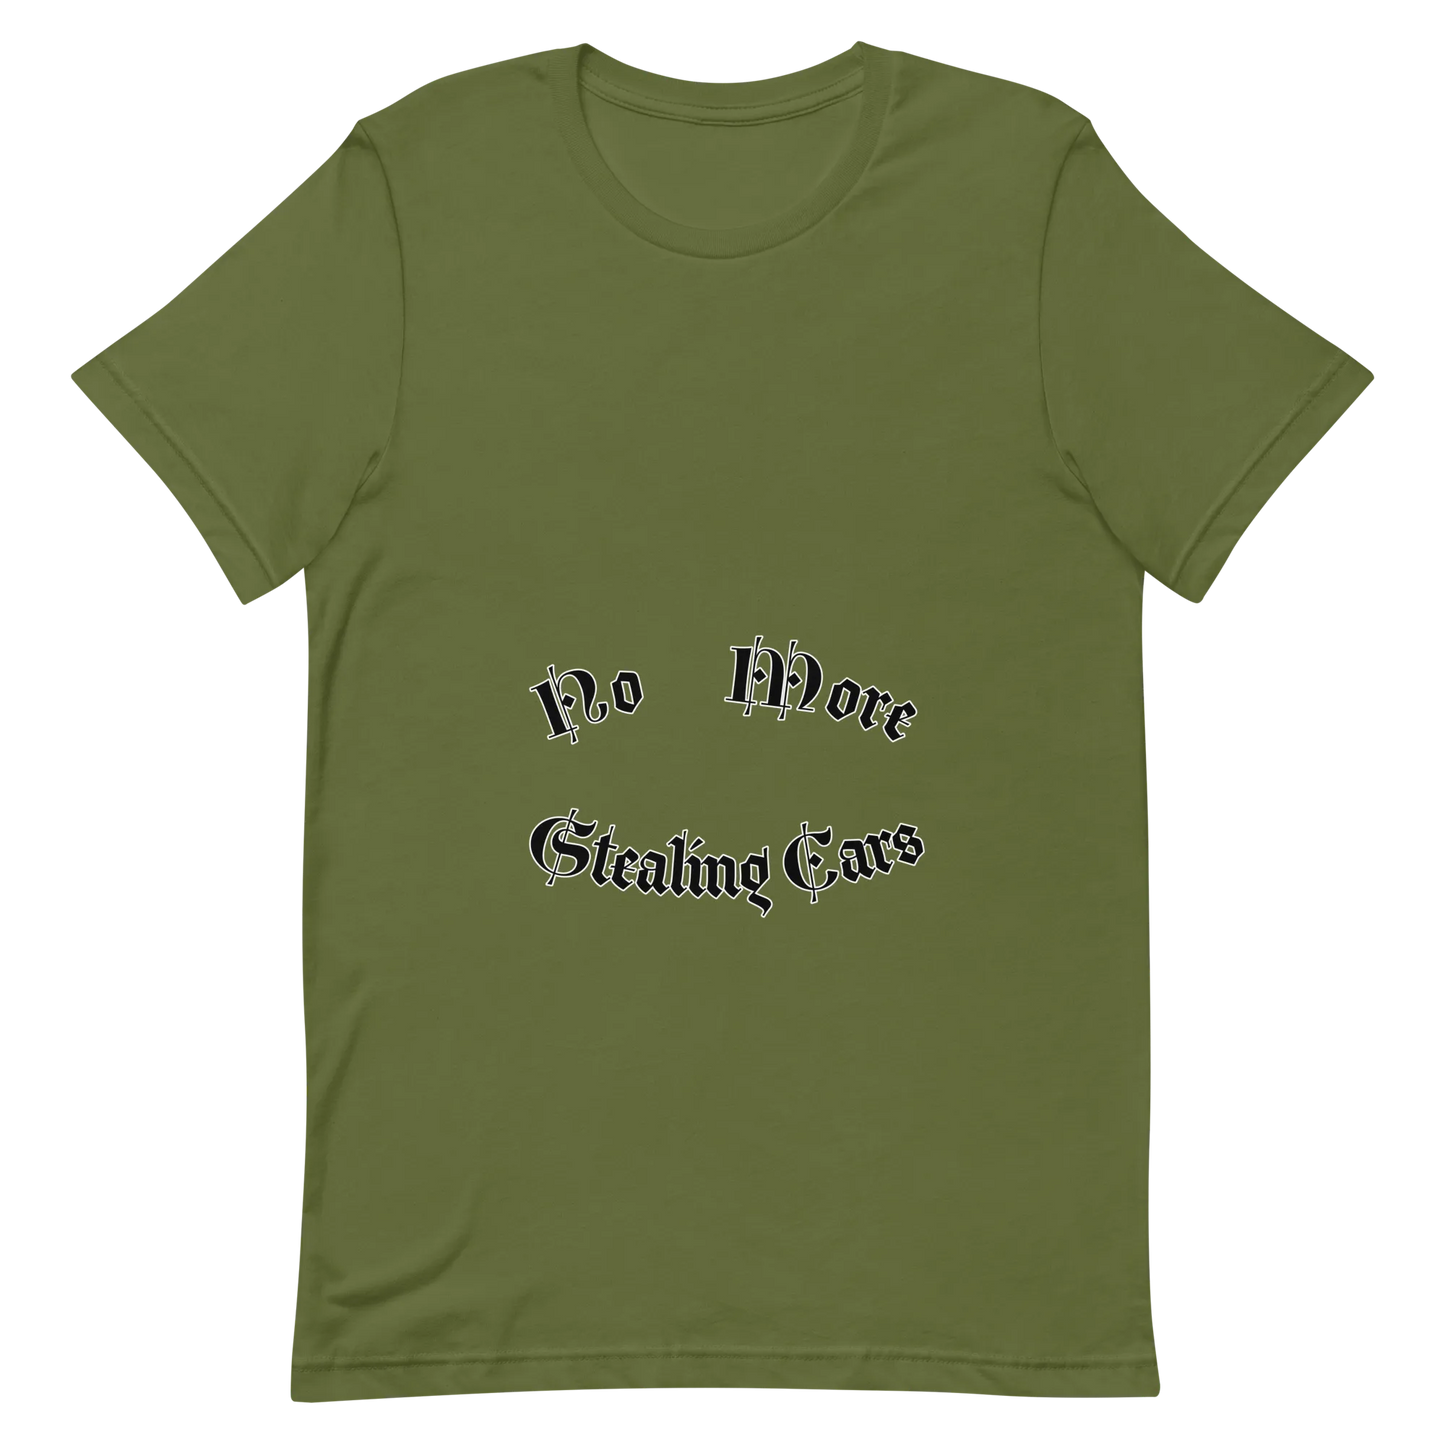 No More Stealing Cars Tee in Olive flatlay